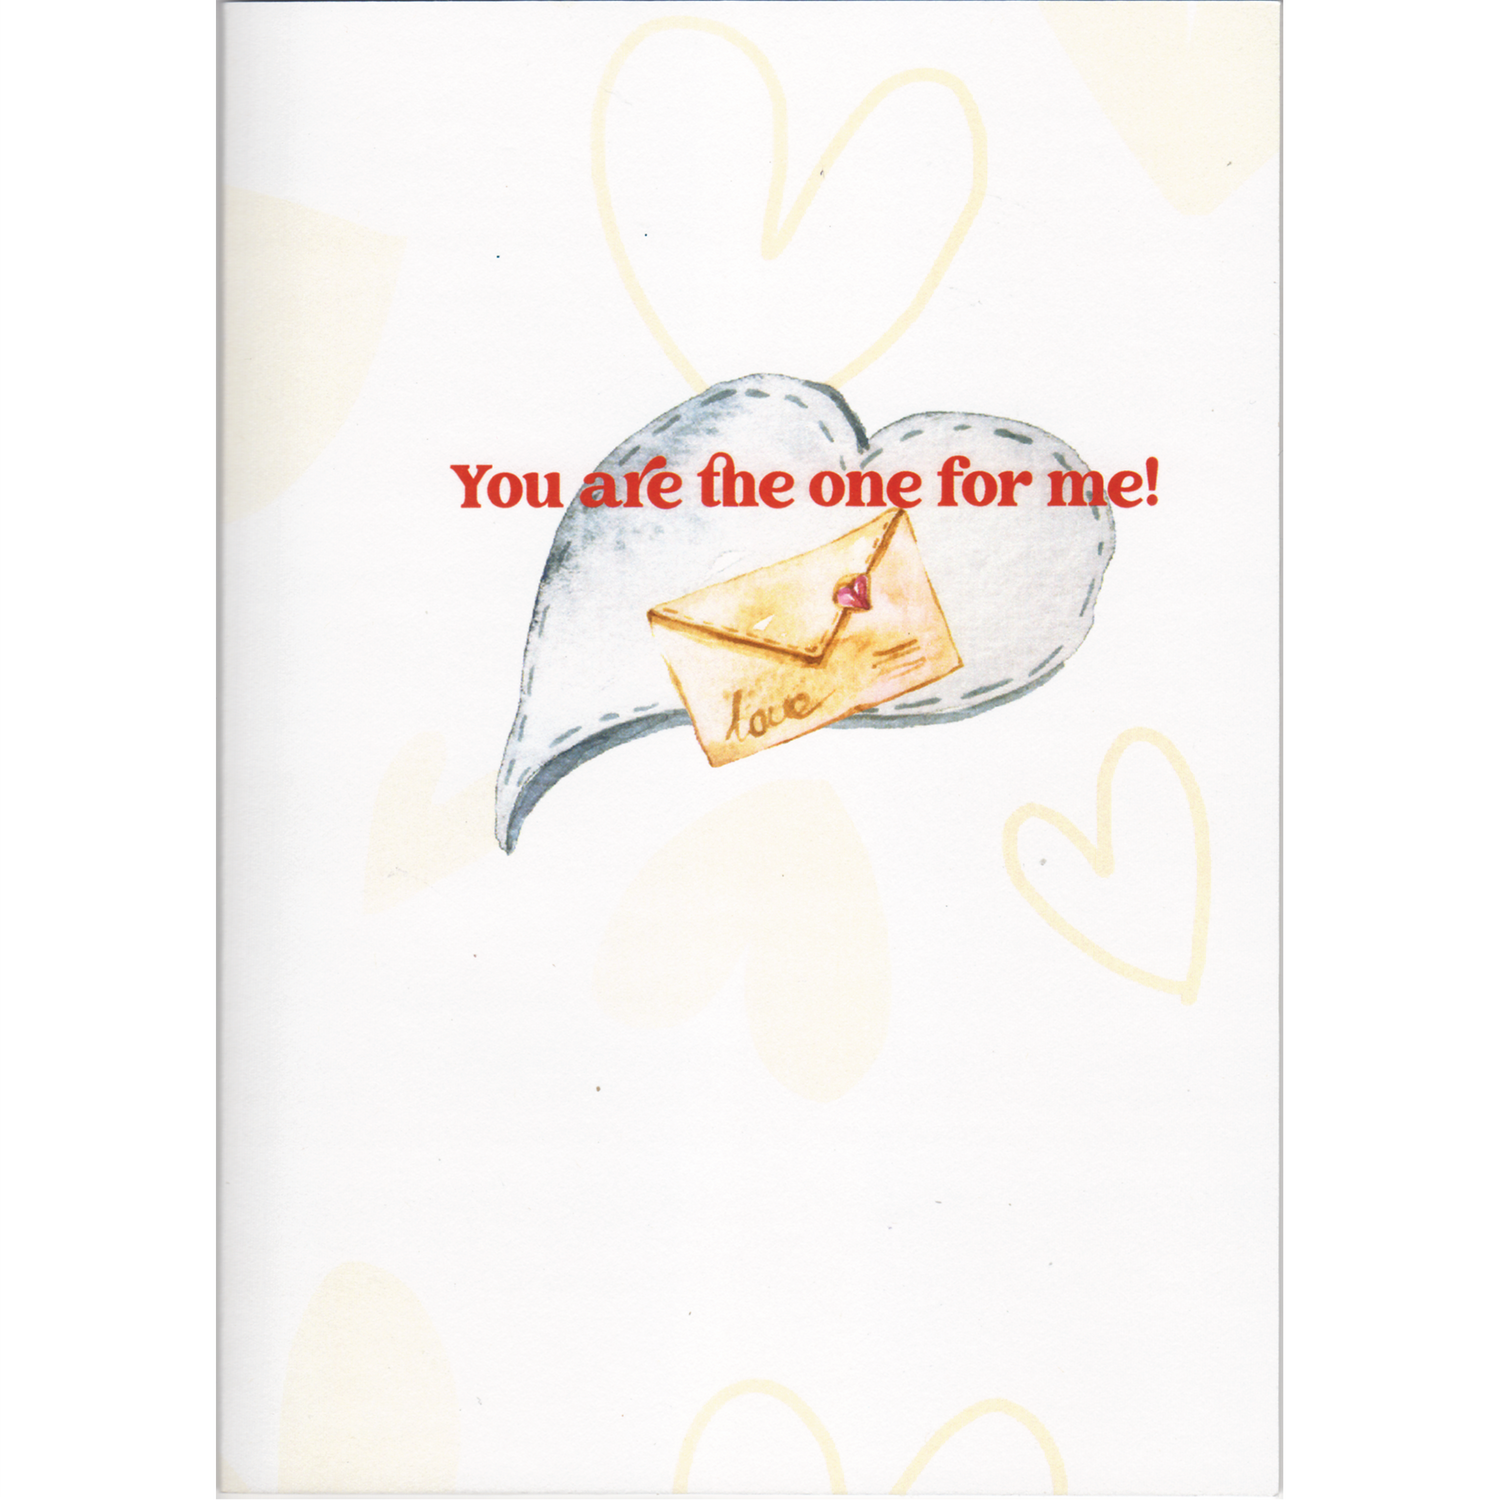 There is a light brown heart pattern paper with the words &quot;You are the one for me!&quot; an image of envelope featuring a heart and the word love in front of a heart.